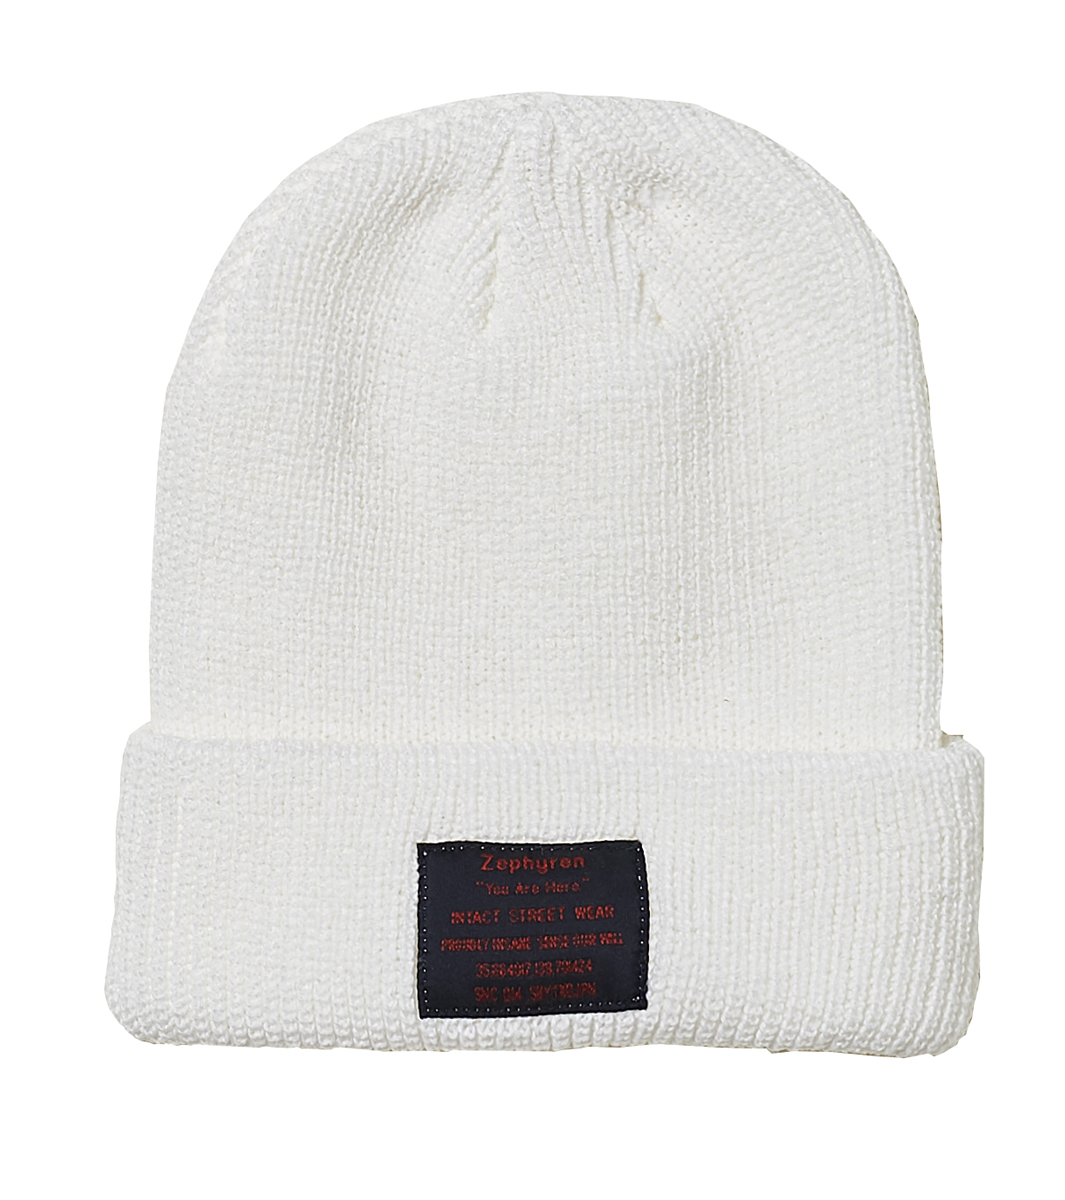 KNIT Beanie -You Are Here WHITE